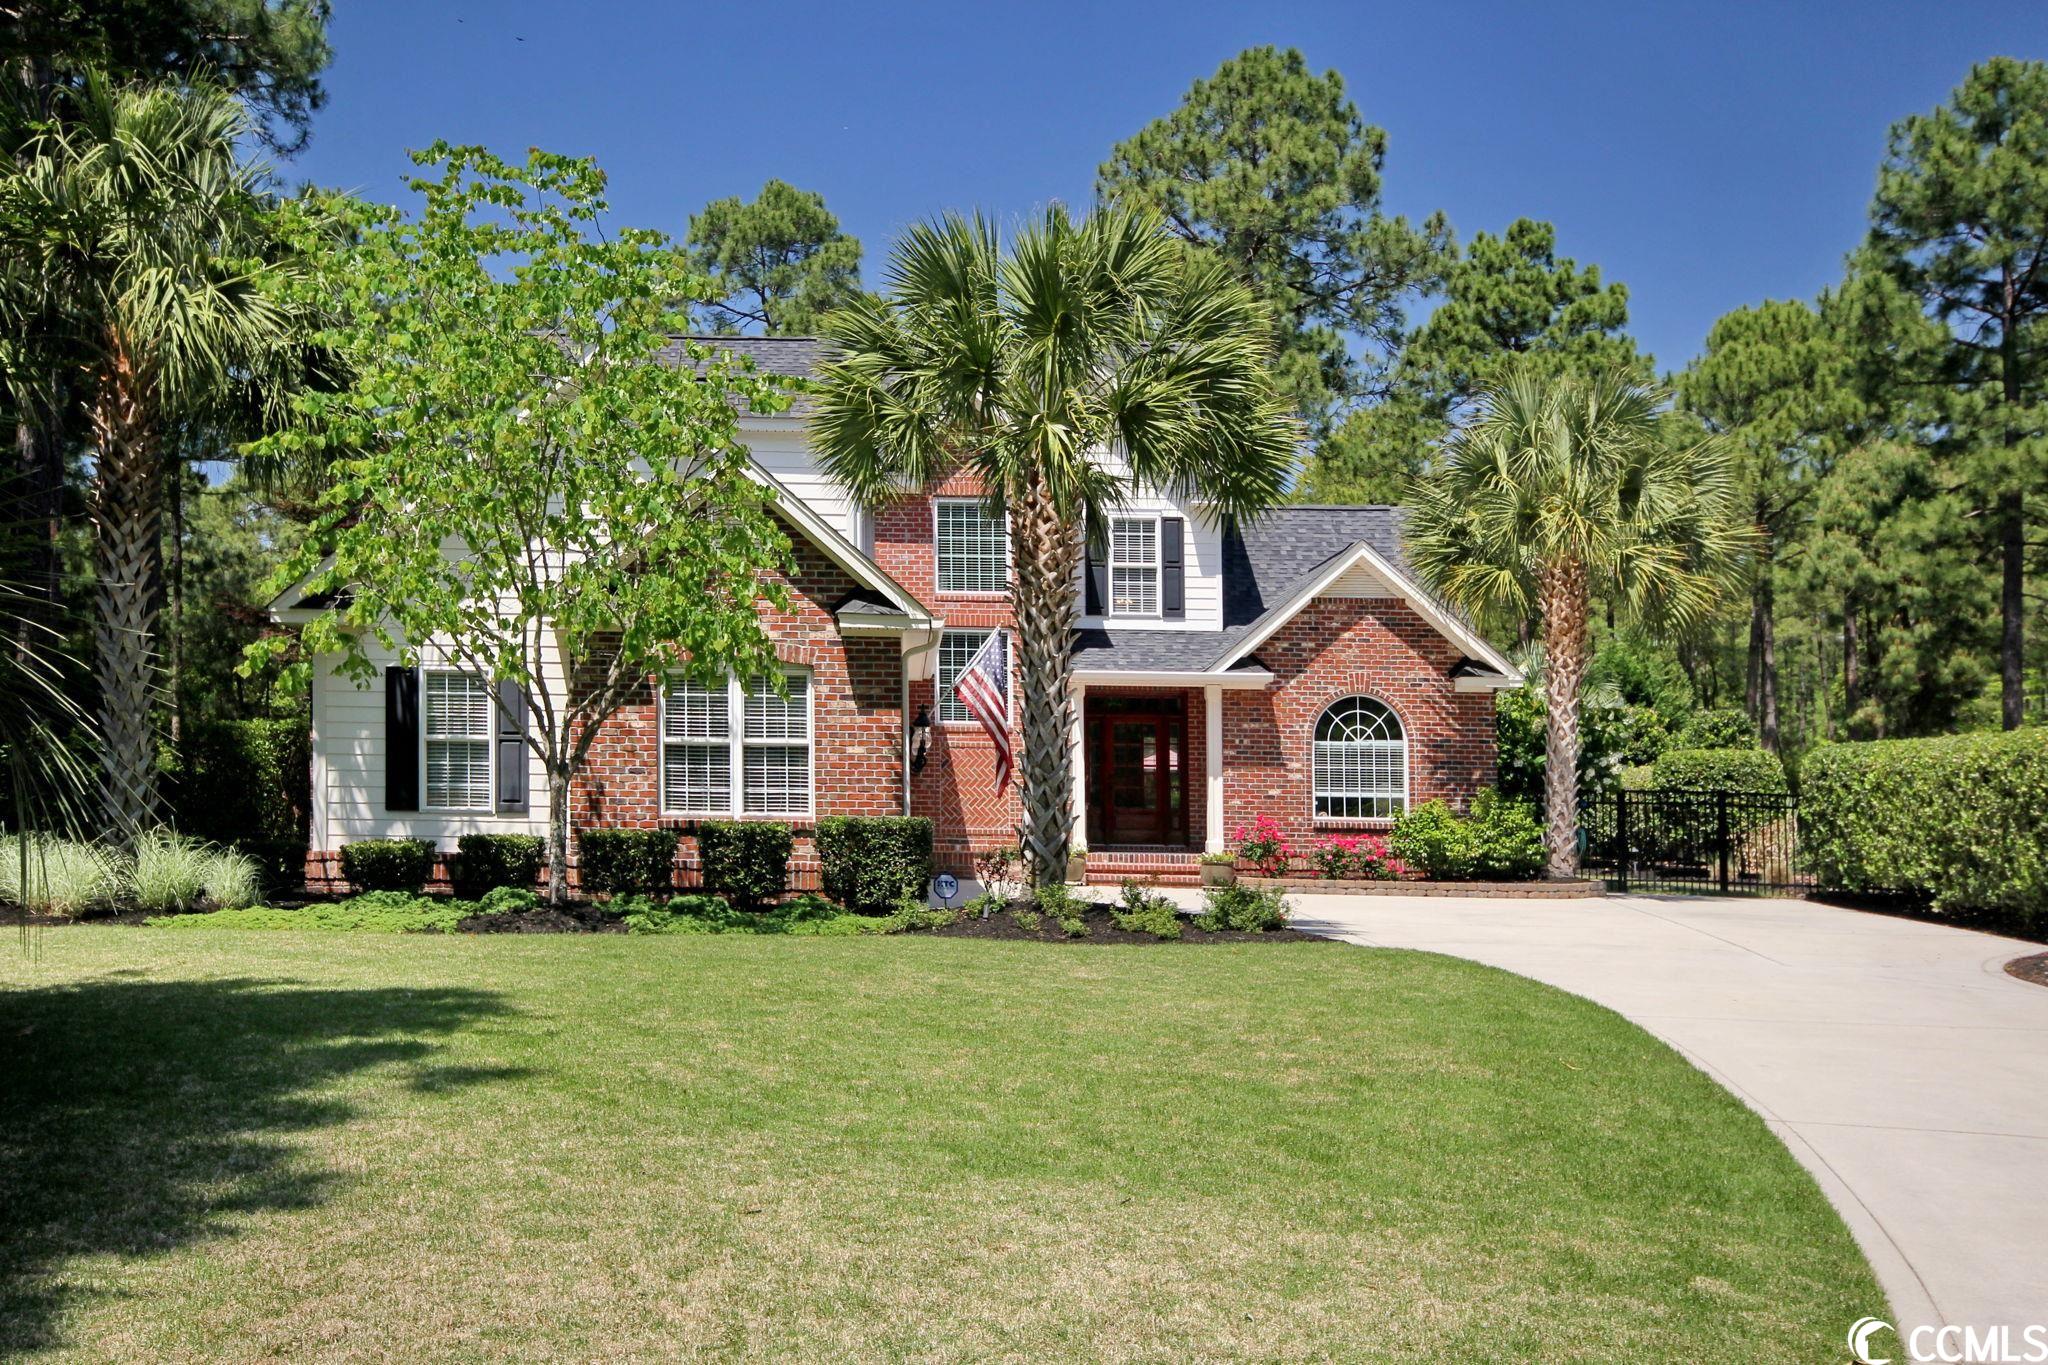 4372 Winged Foot Ct. Myrtle Beach, SC 29579